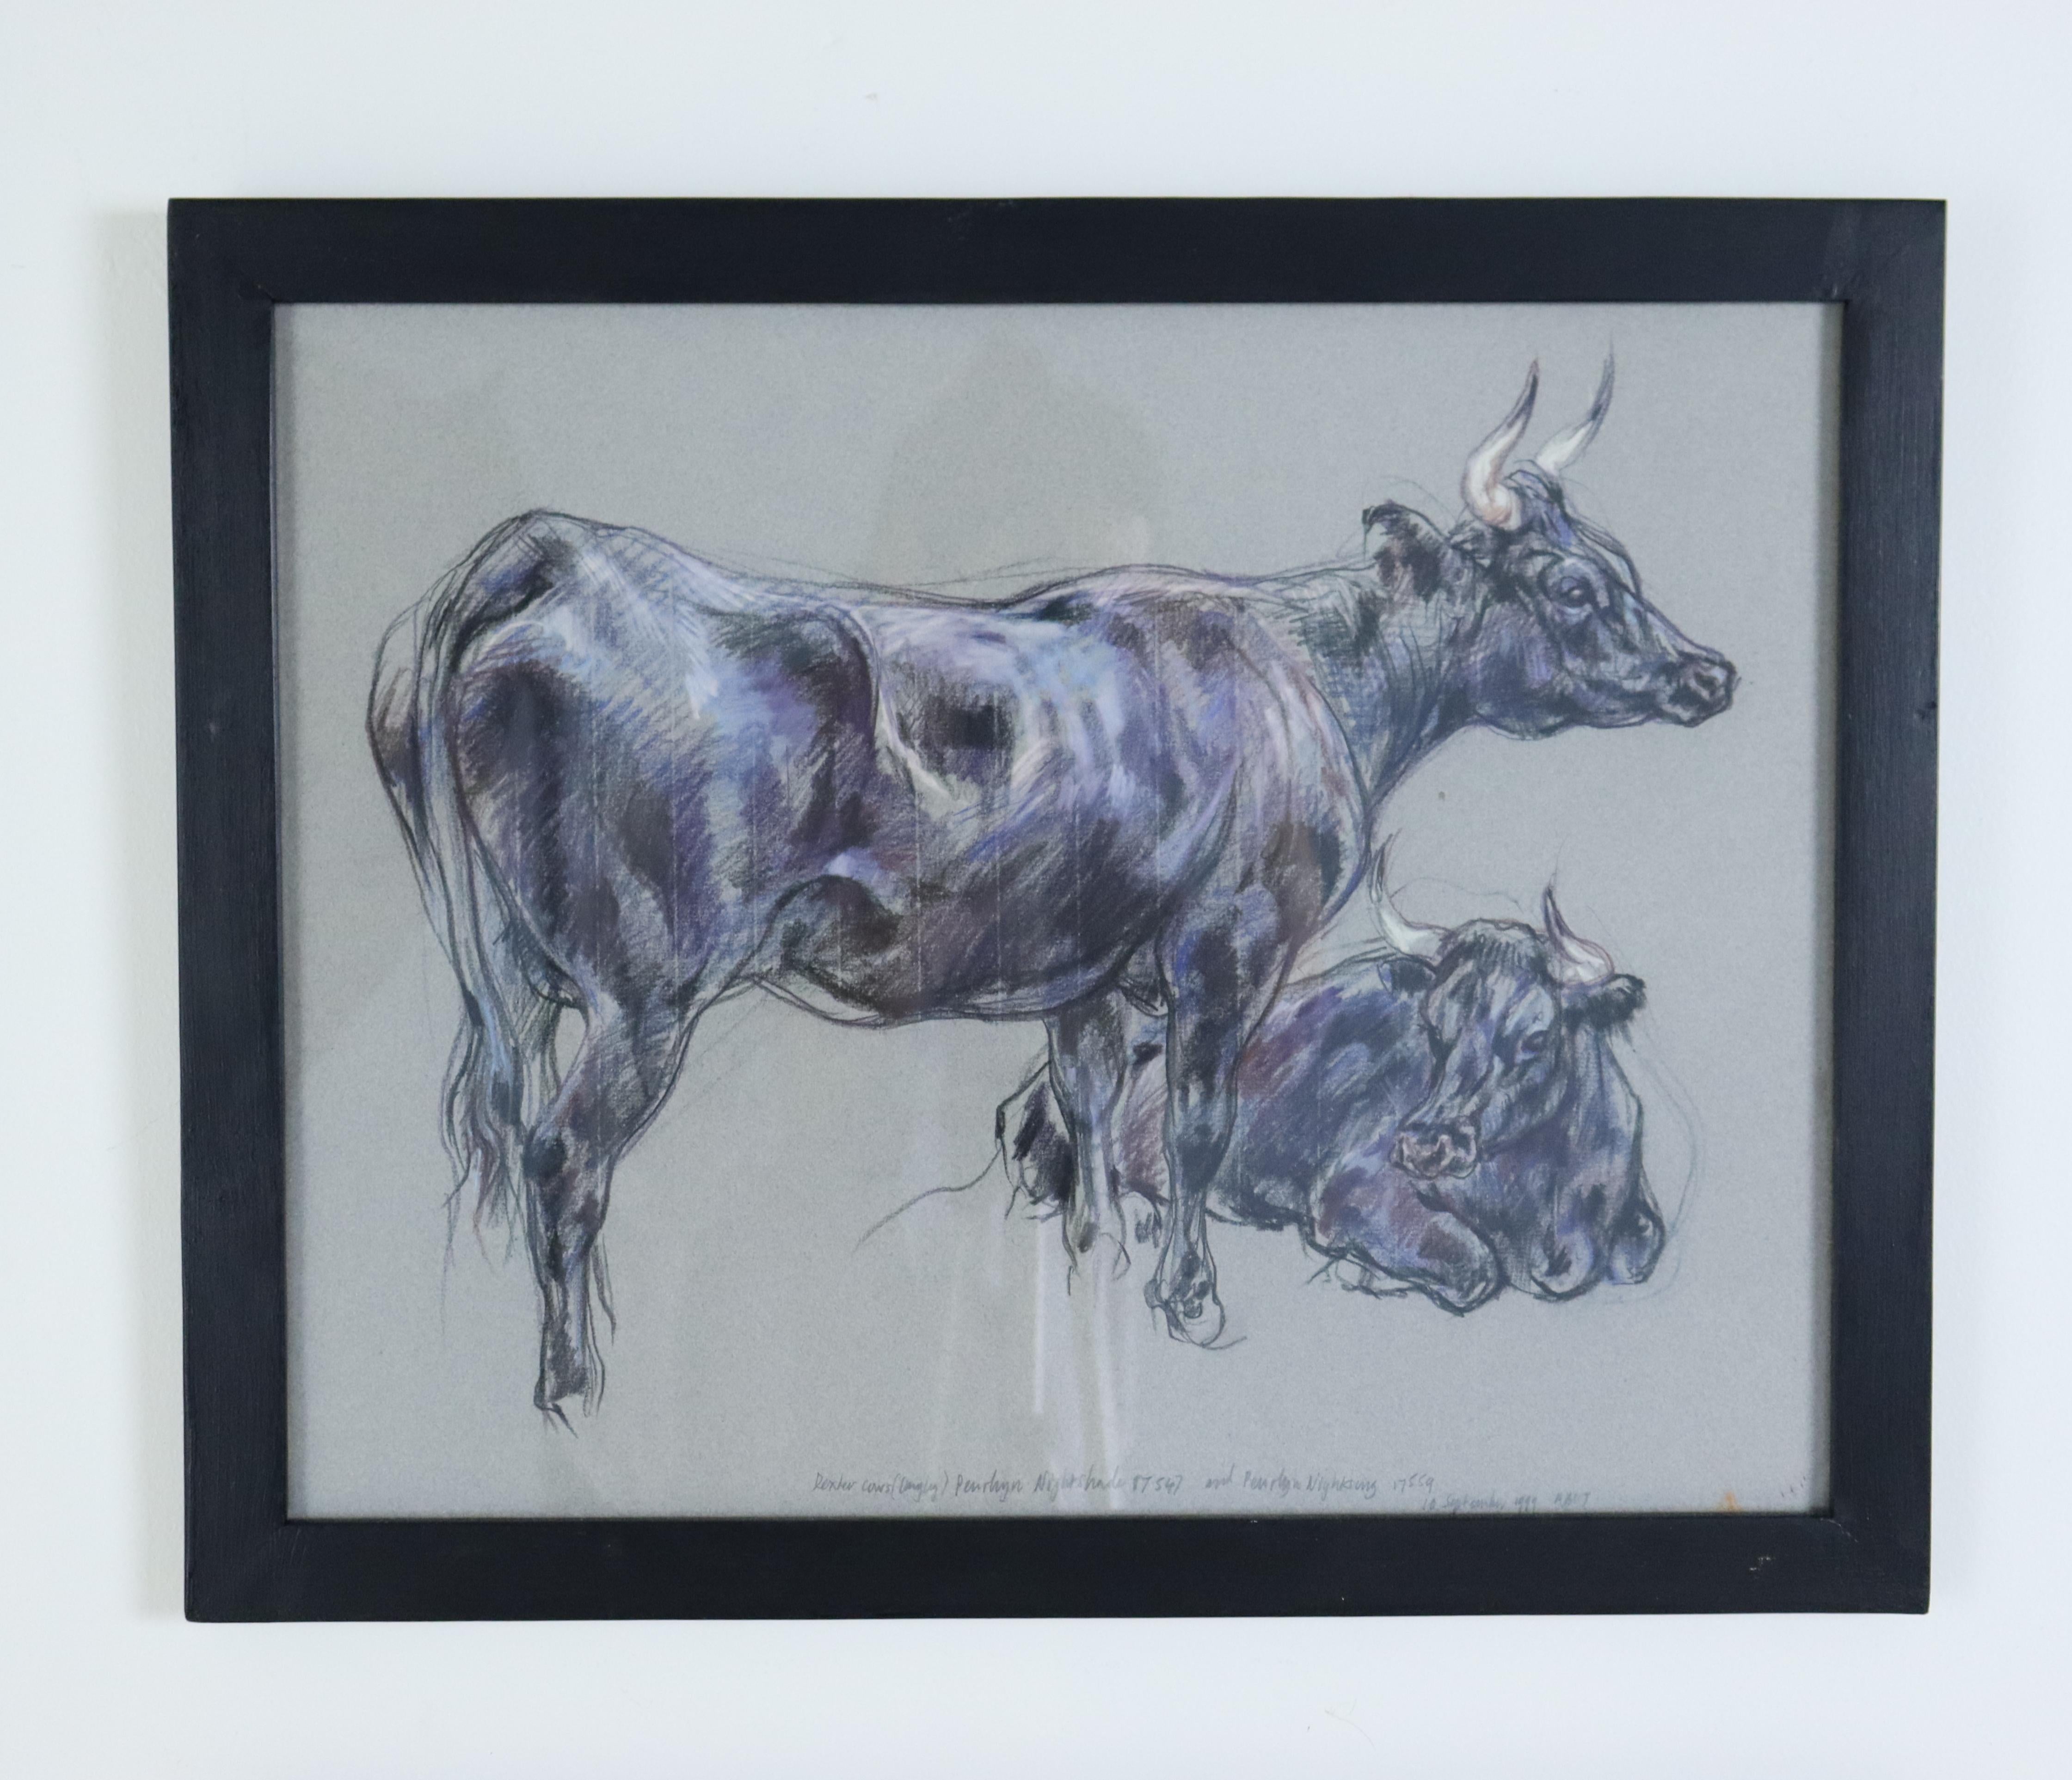 A pair of cow studies in charcoal and pastel,  Leslie Charlotte Benenson (1941-2018),  deceased Royal Academy artist in 1999. These appear to be, from the top, a Dexter cow and a Starland cow. Highly decorative, they are slightly more vibrant than